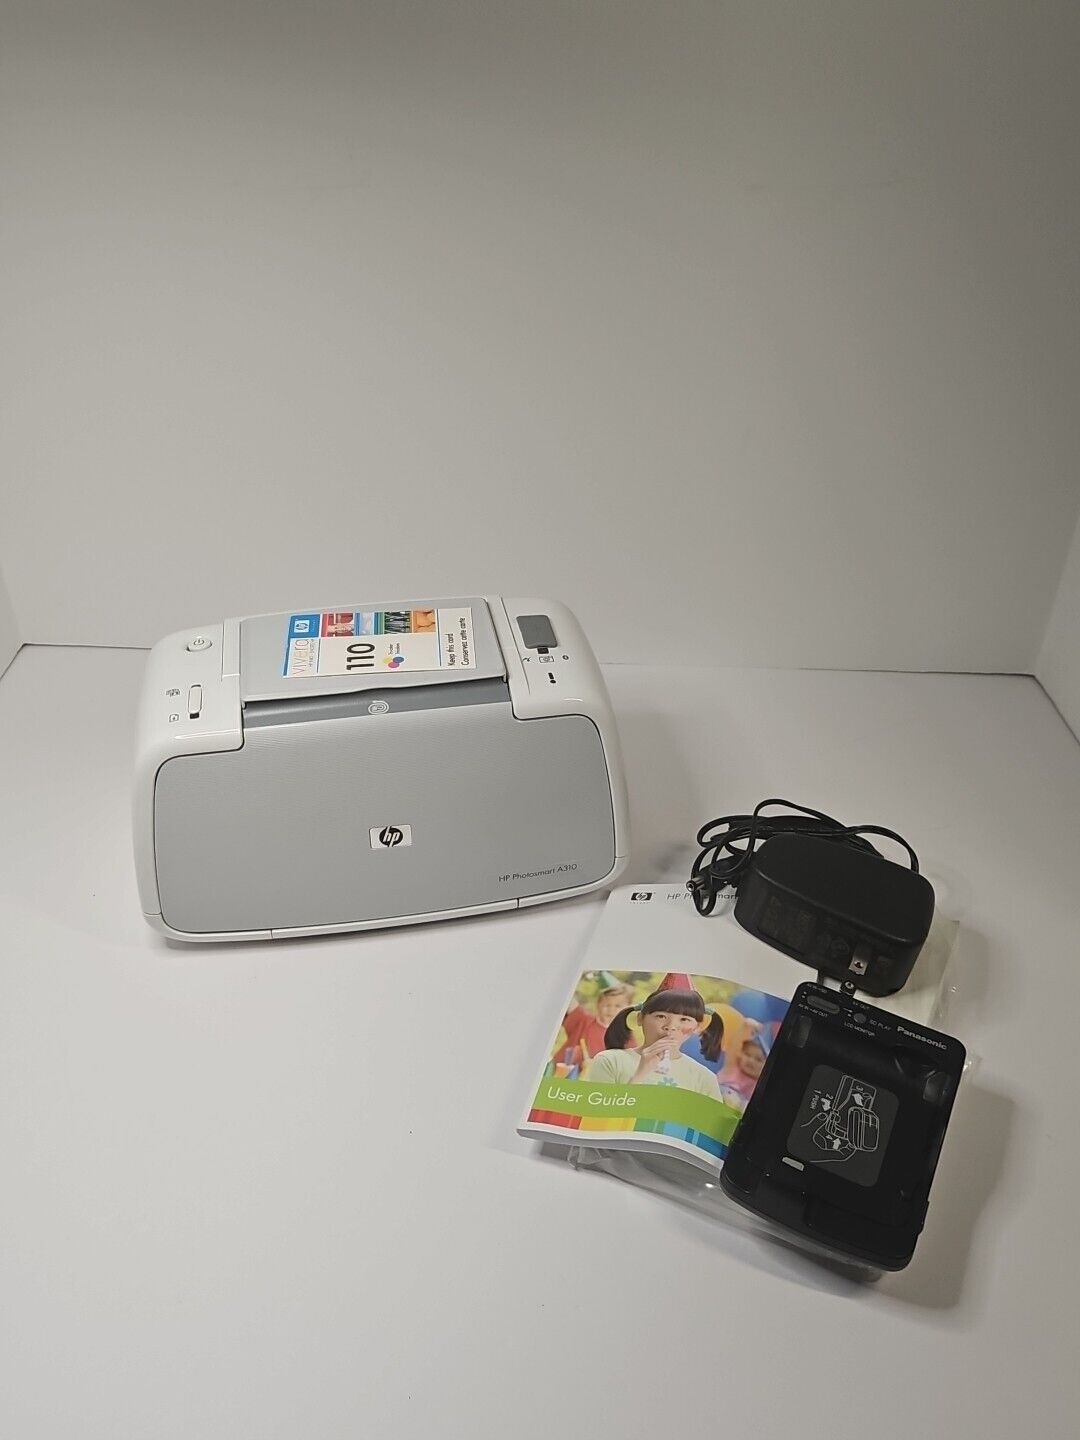 HP Photosmart A310 Digital Photo Printer FOR PARTS/UNTESTED